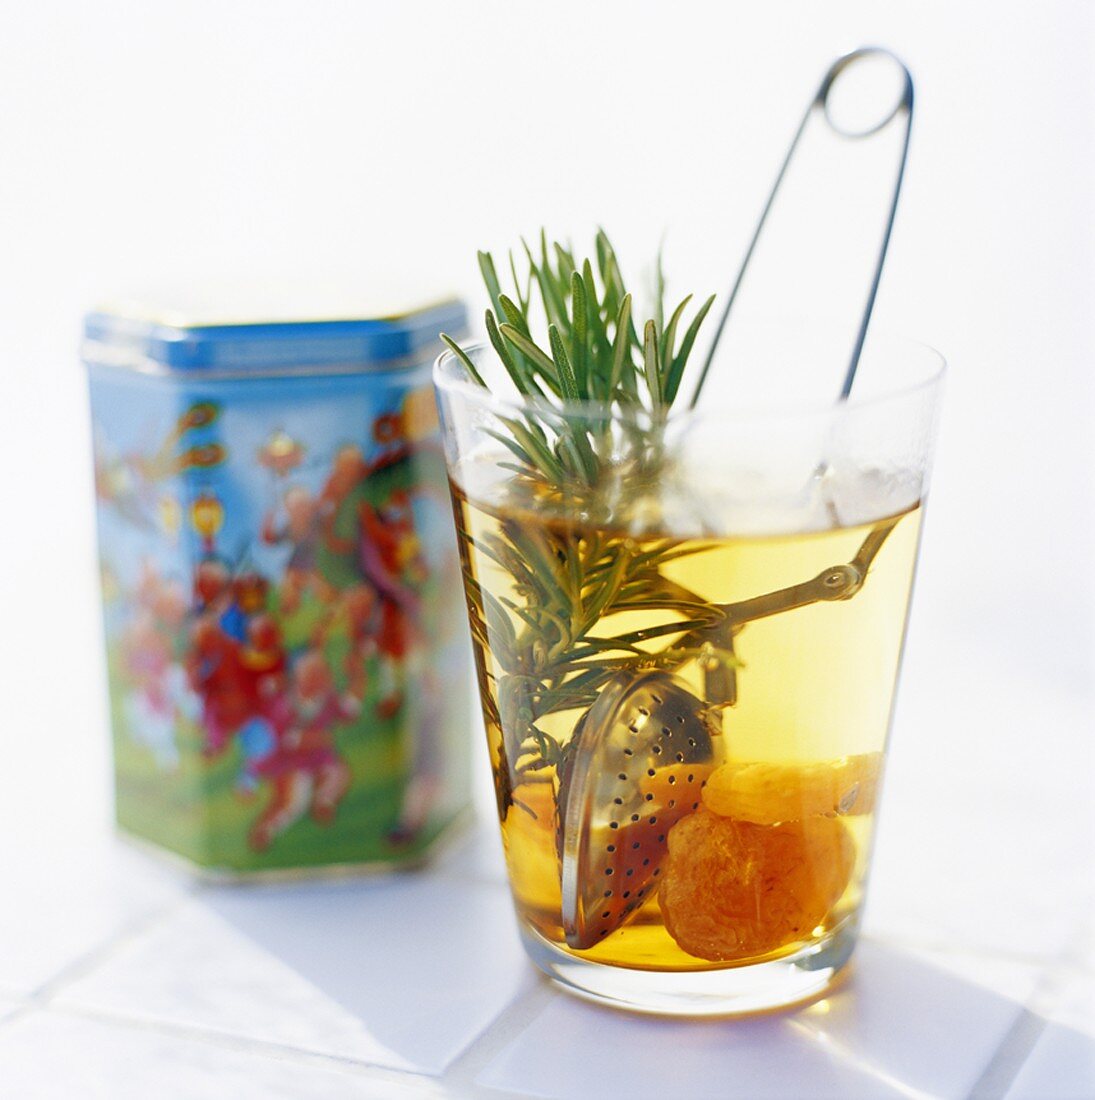 Tea with rosemary and dried fruit in glass, tea tin